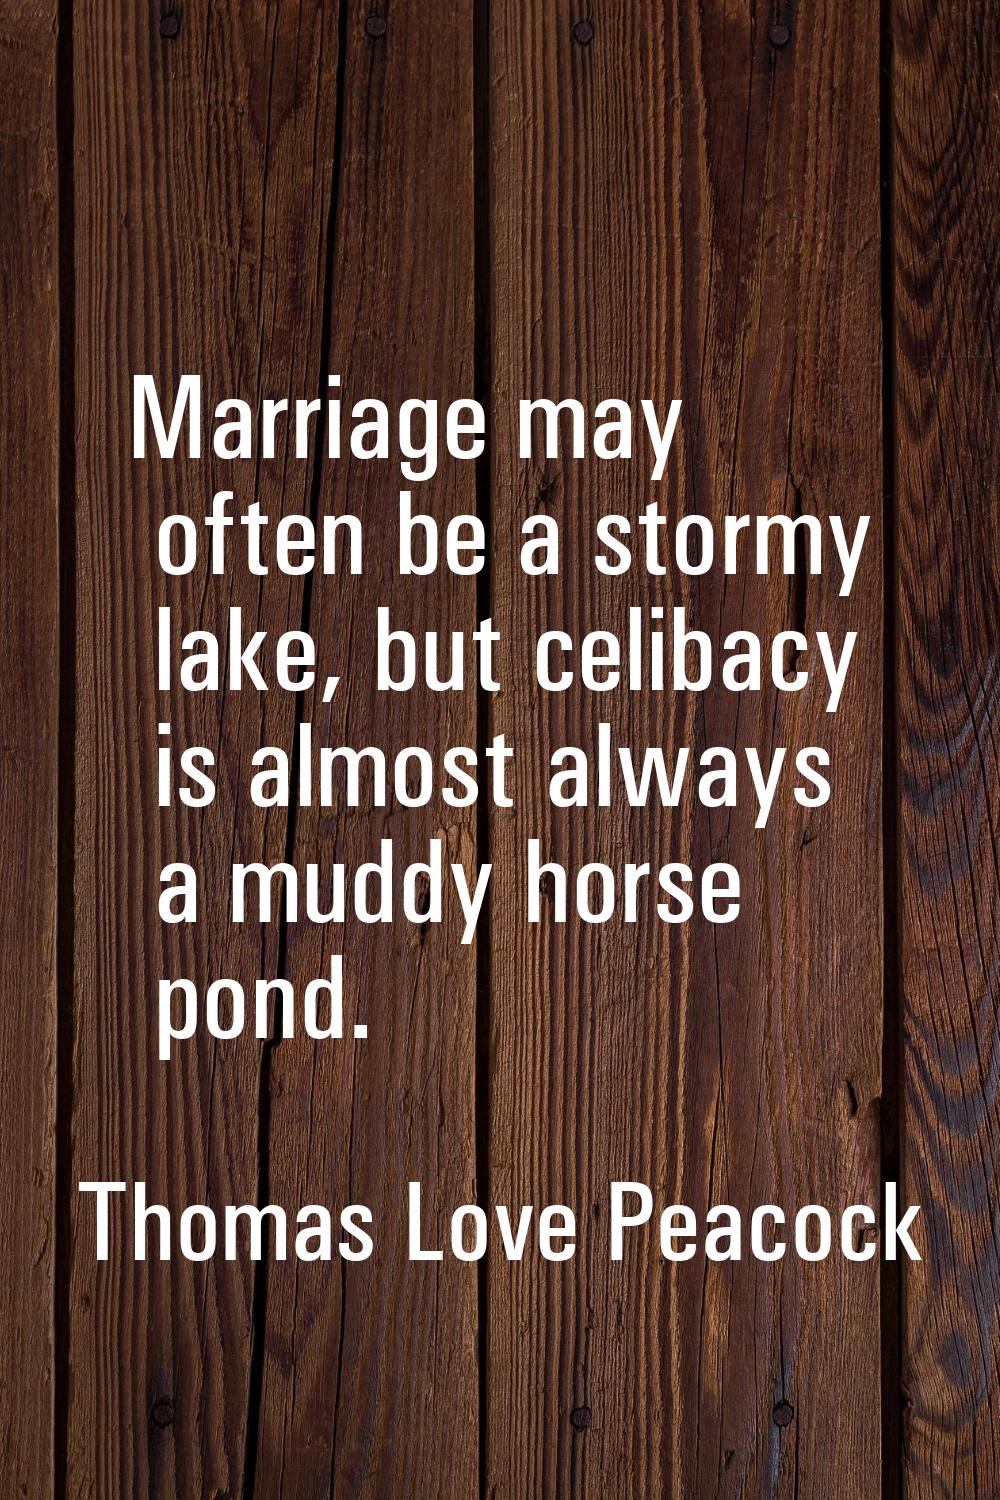 Marriage may often be a stormy lake, but celibacy is almost always a muddy horse pond.